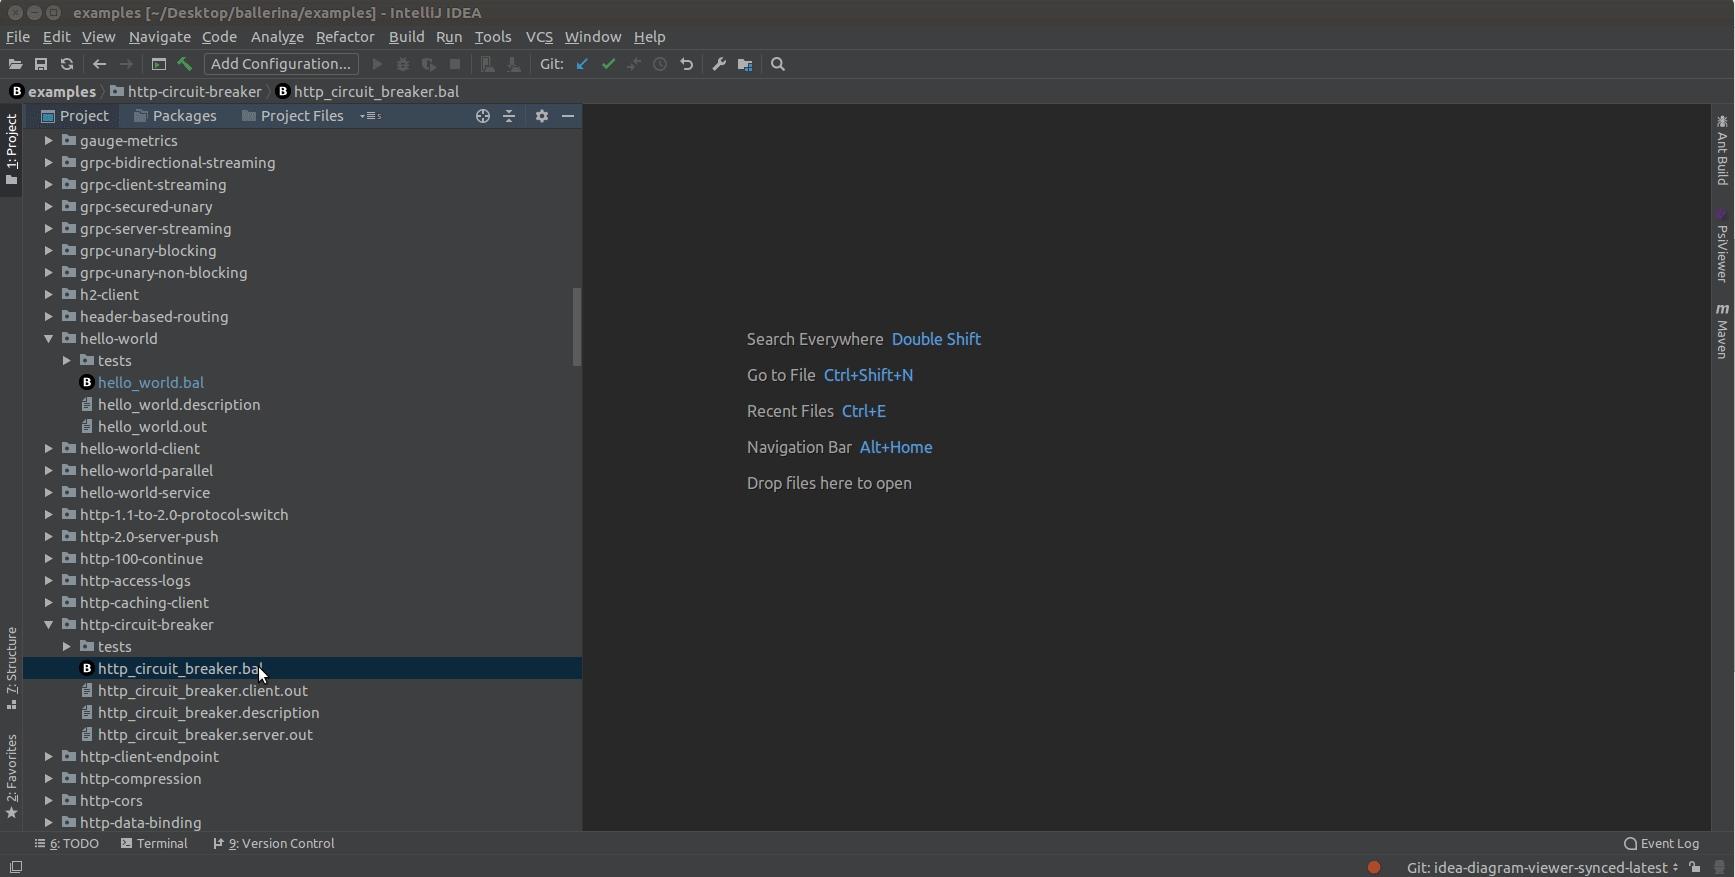 Using the features of the IntelliJ plugin